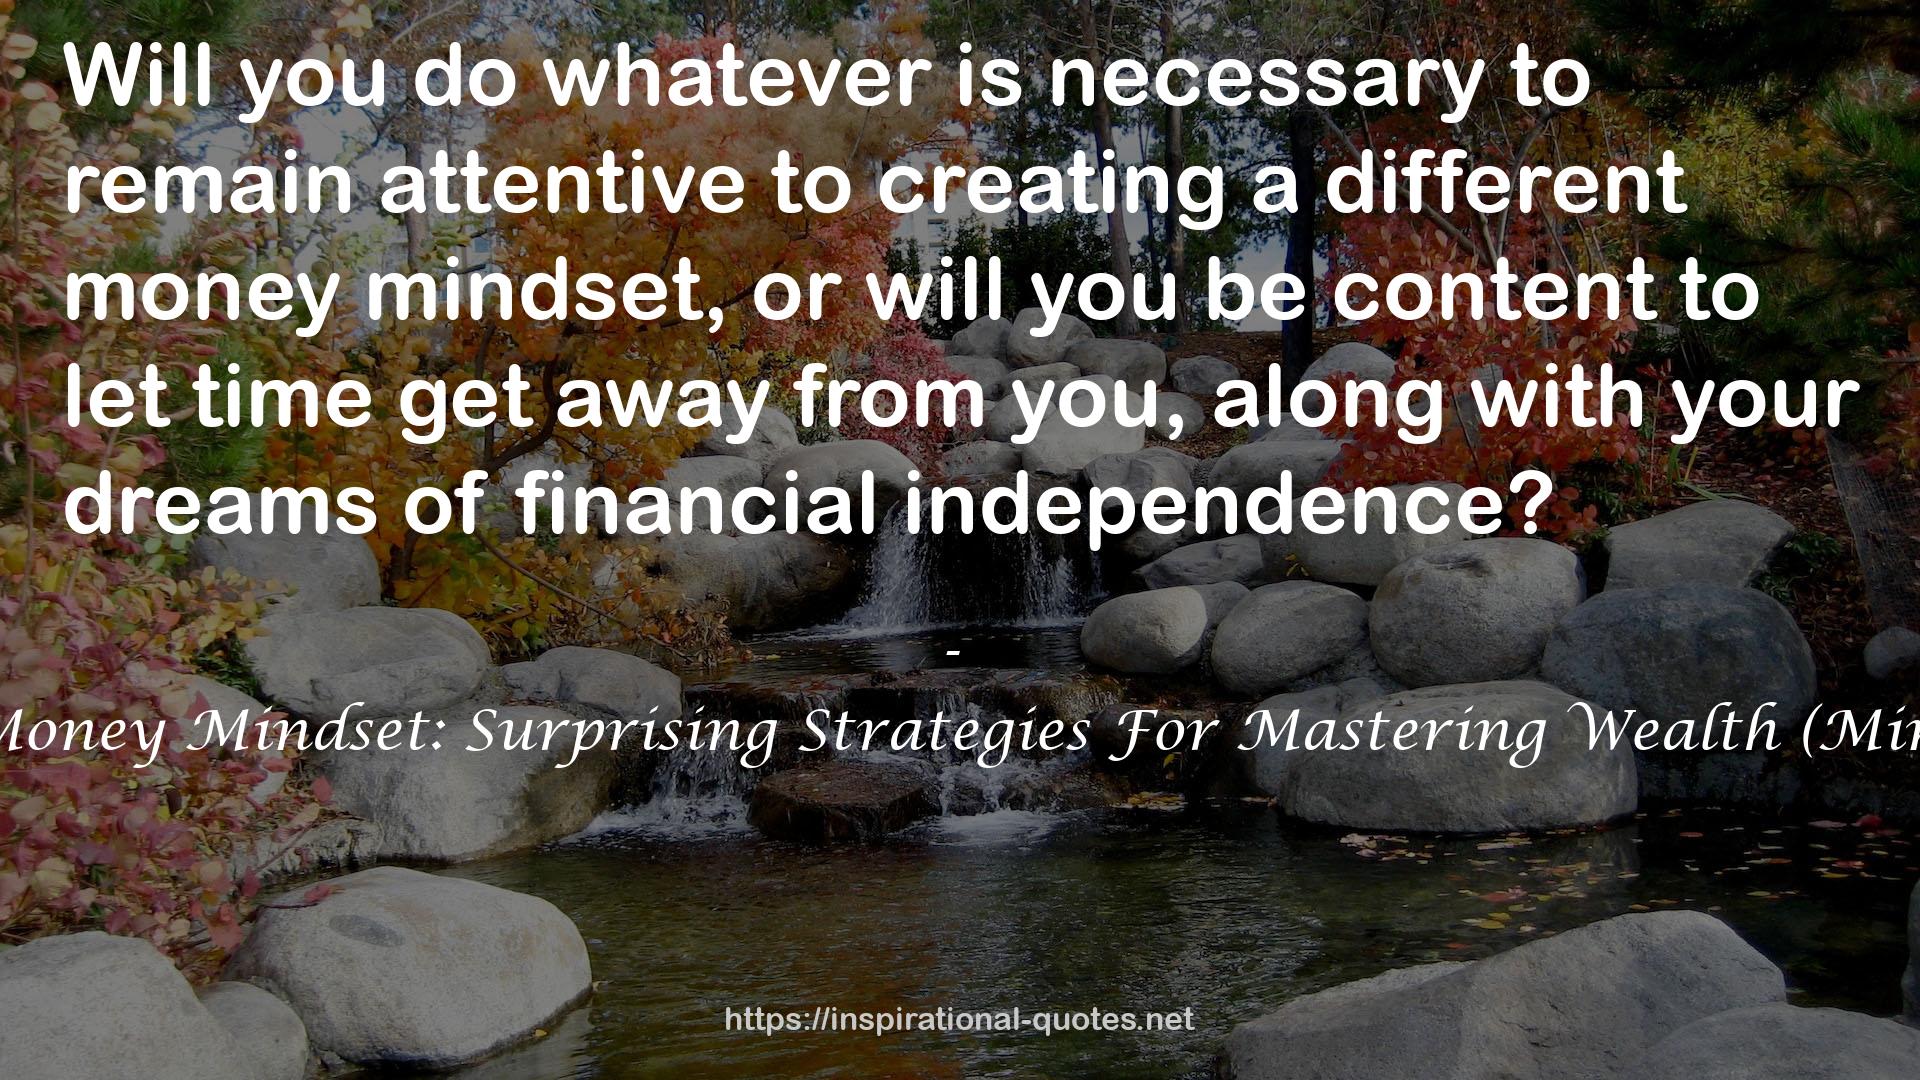 Reboot Your Money Mindset: Surprising Strategies For Mastering Wealth (Mindset Mastery) QUOTES